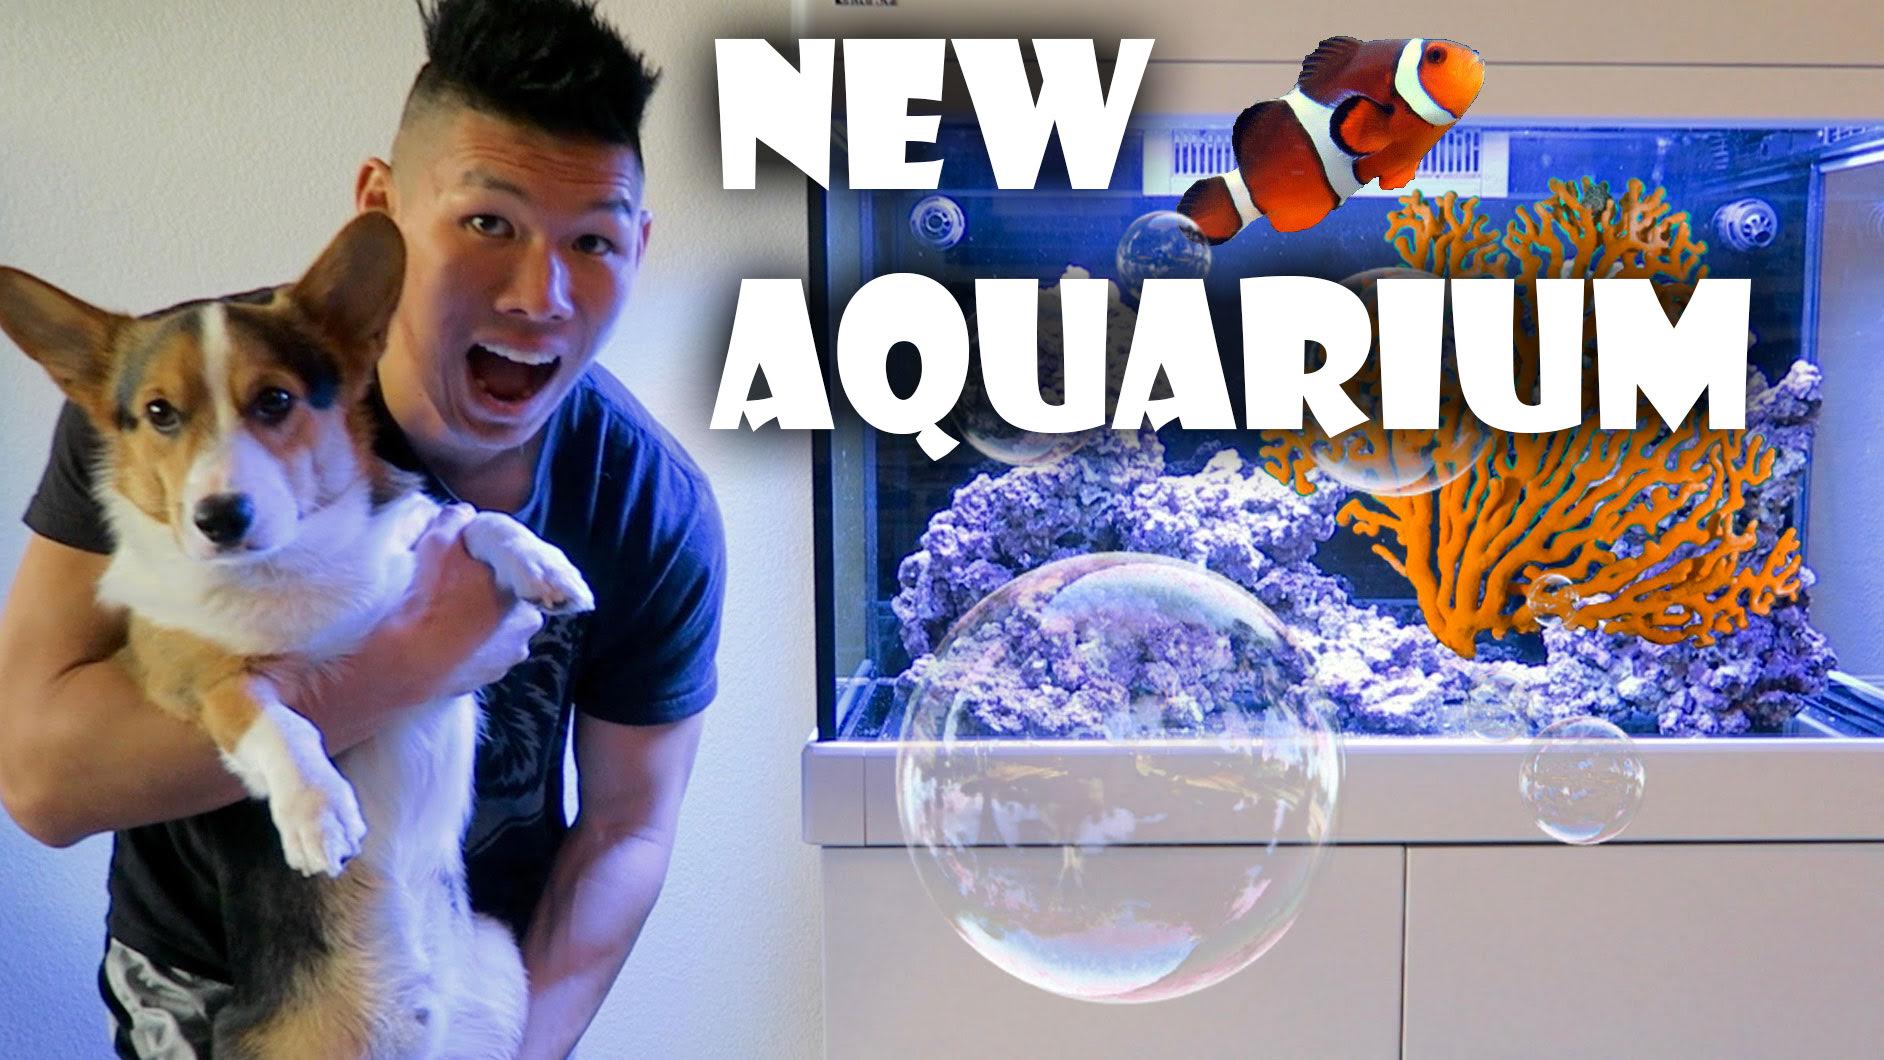 STARTING NEW SALTWATER REEF AQUARIUM | WHAT I LEARNED